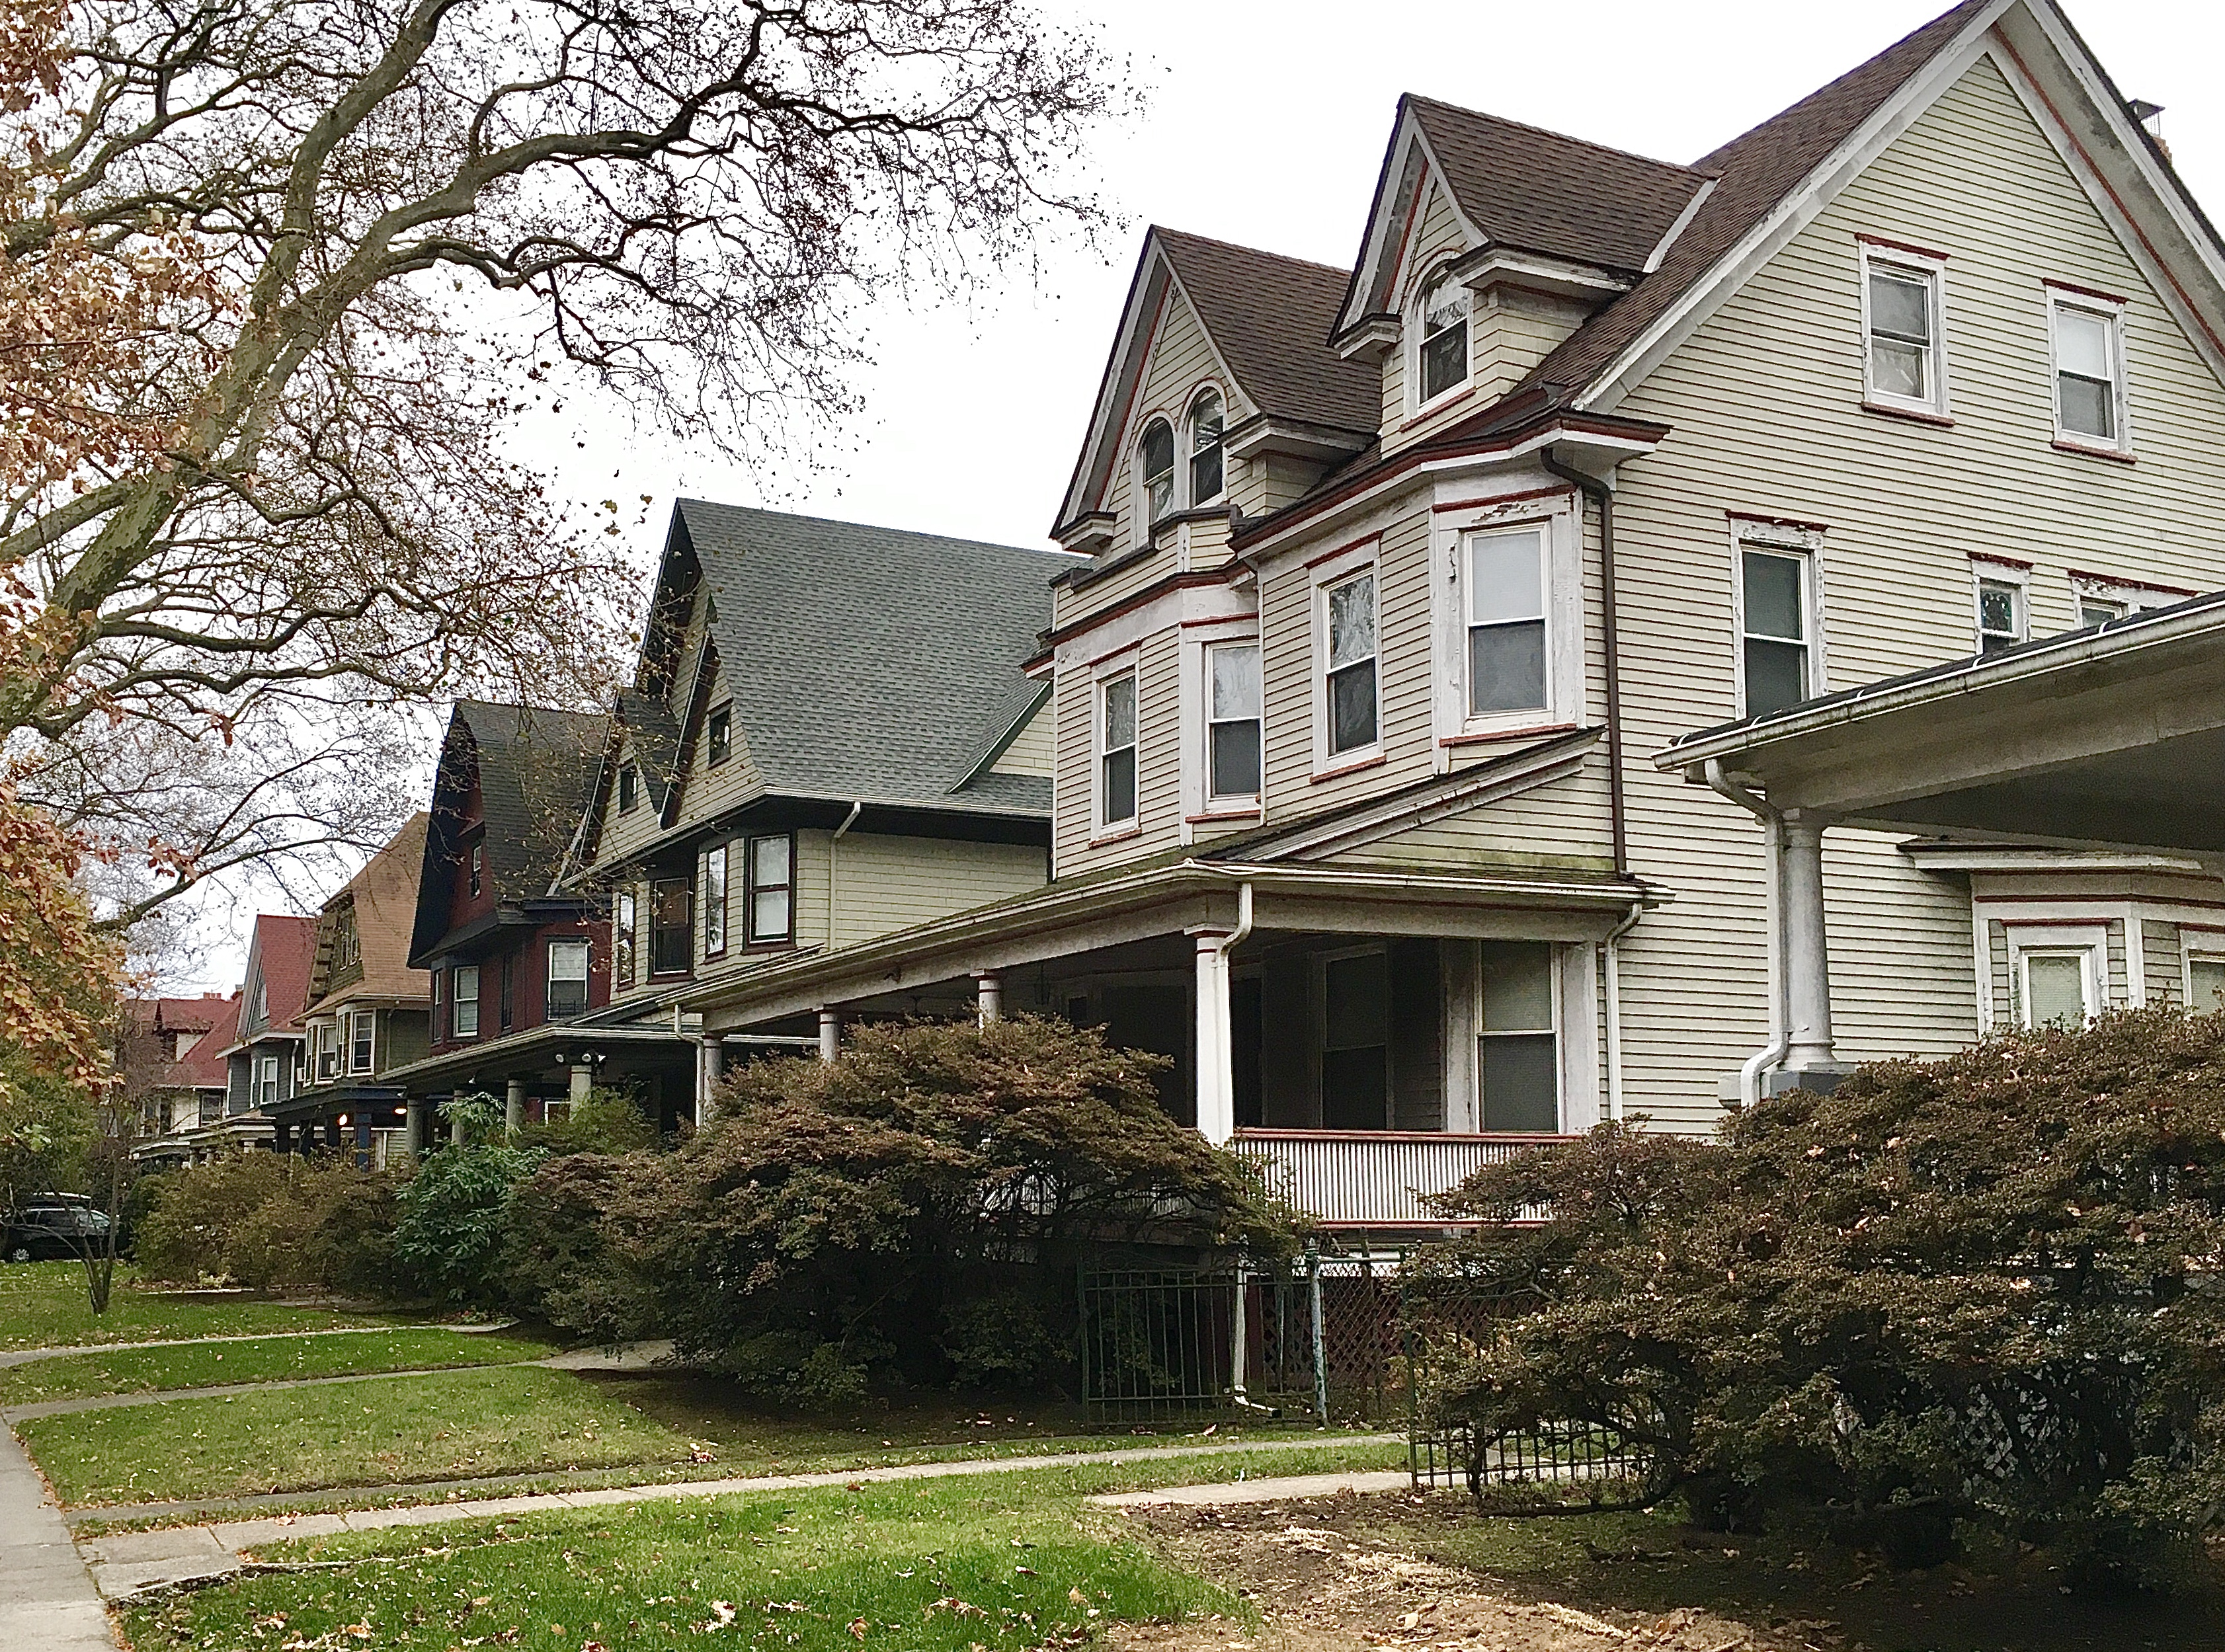 This row of landmarked Midwood Park homes includes 664 East 18th St. (at right), which was designed by architect Benjamin Driesler and constructed around 1904. Photo: Lore Croghan/Brooklyn Eagle